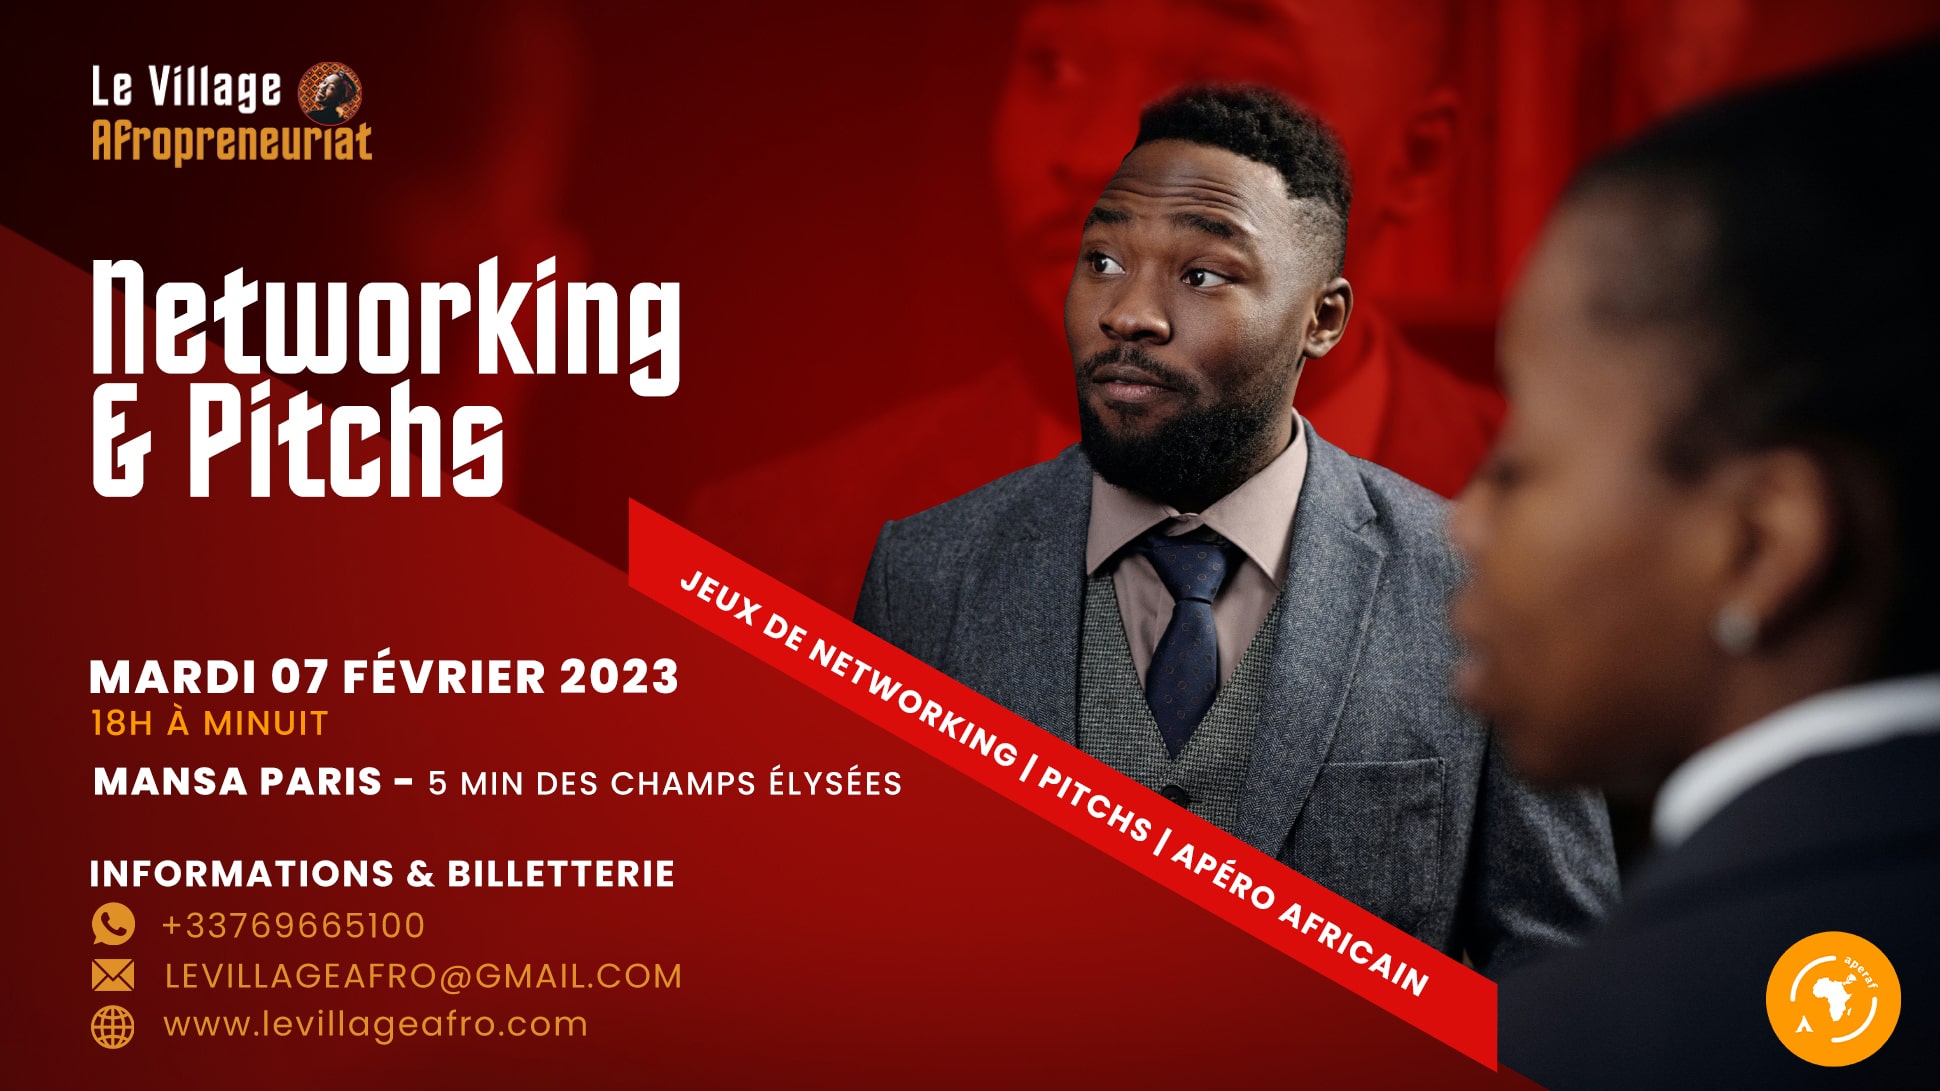 Networking & Pitchs - Le Village Afropreneuriat